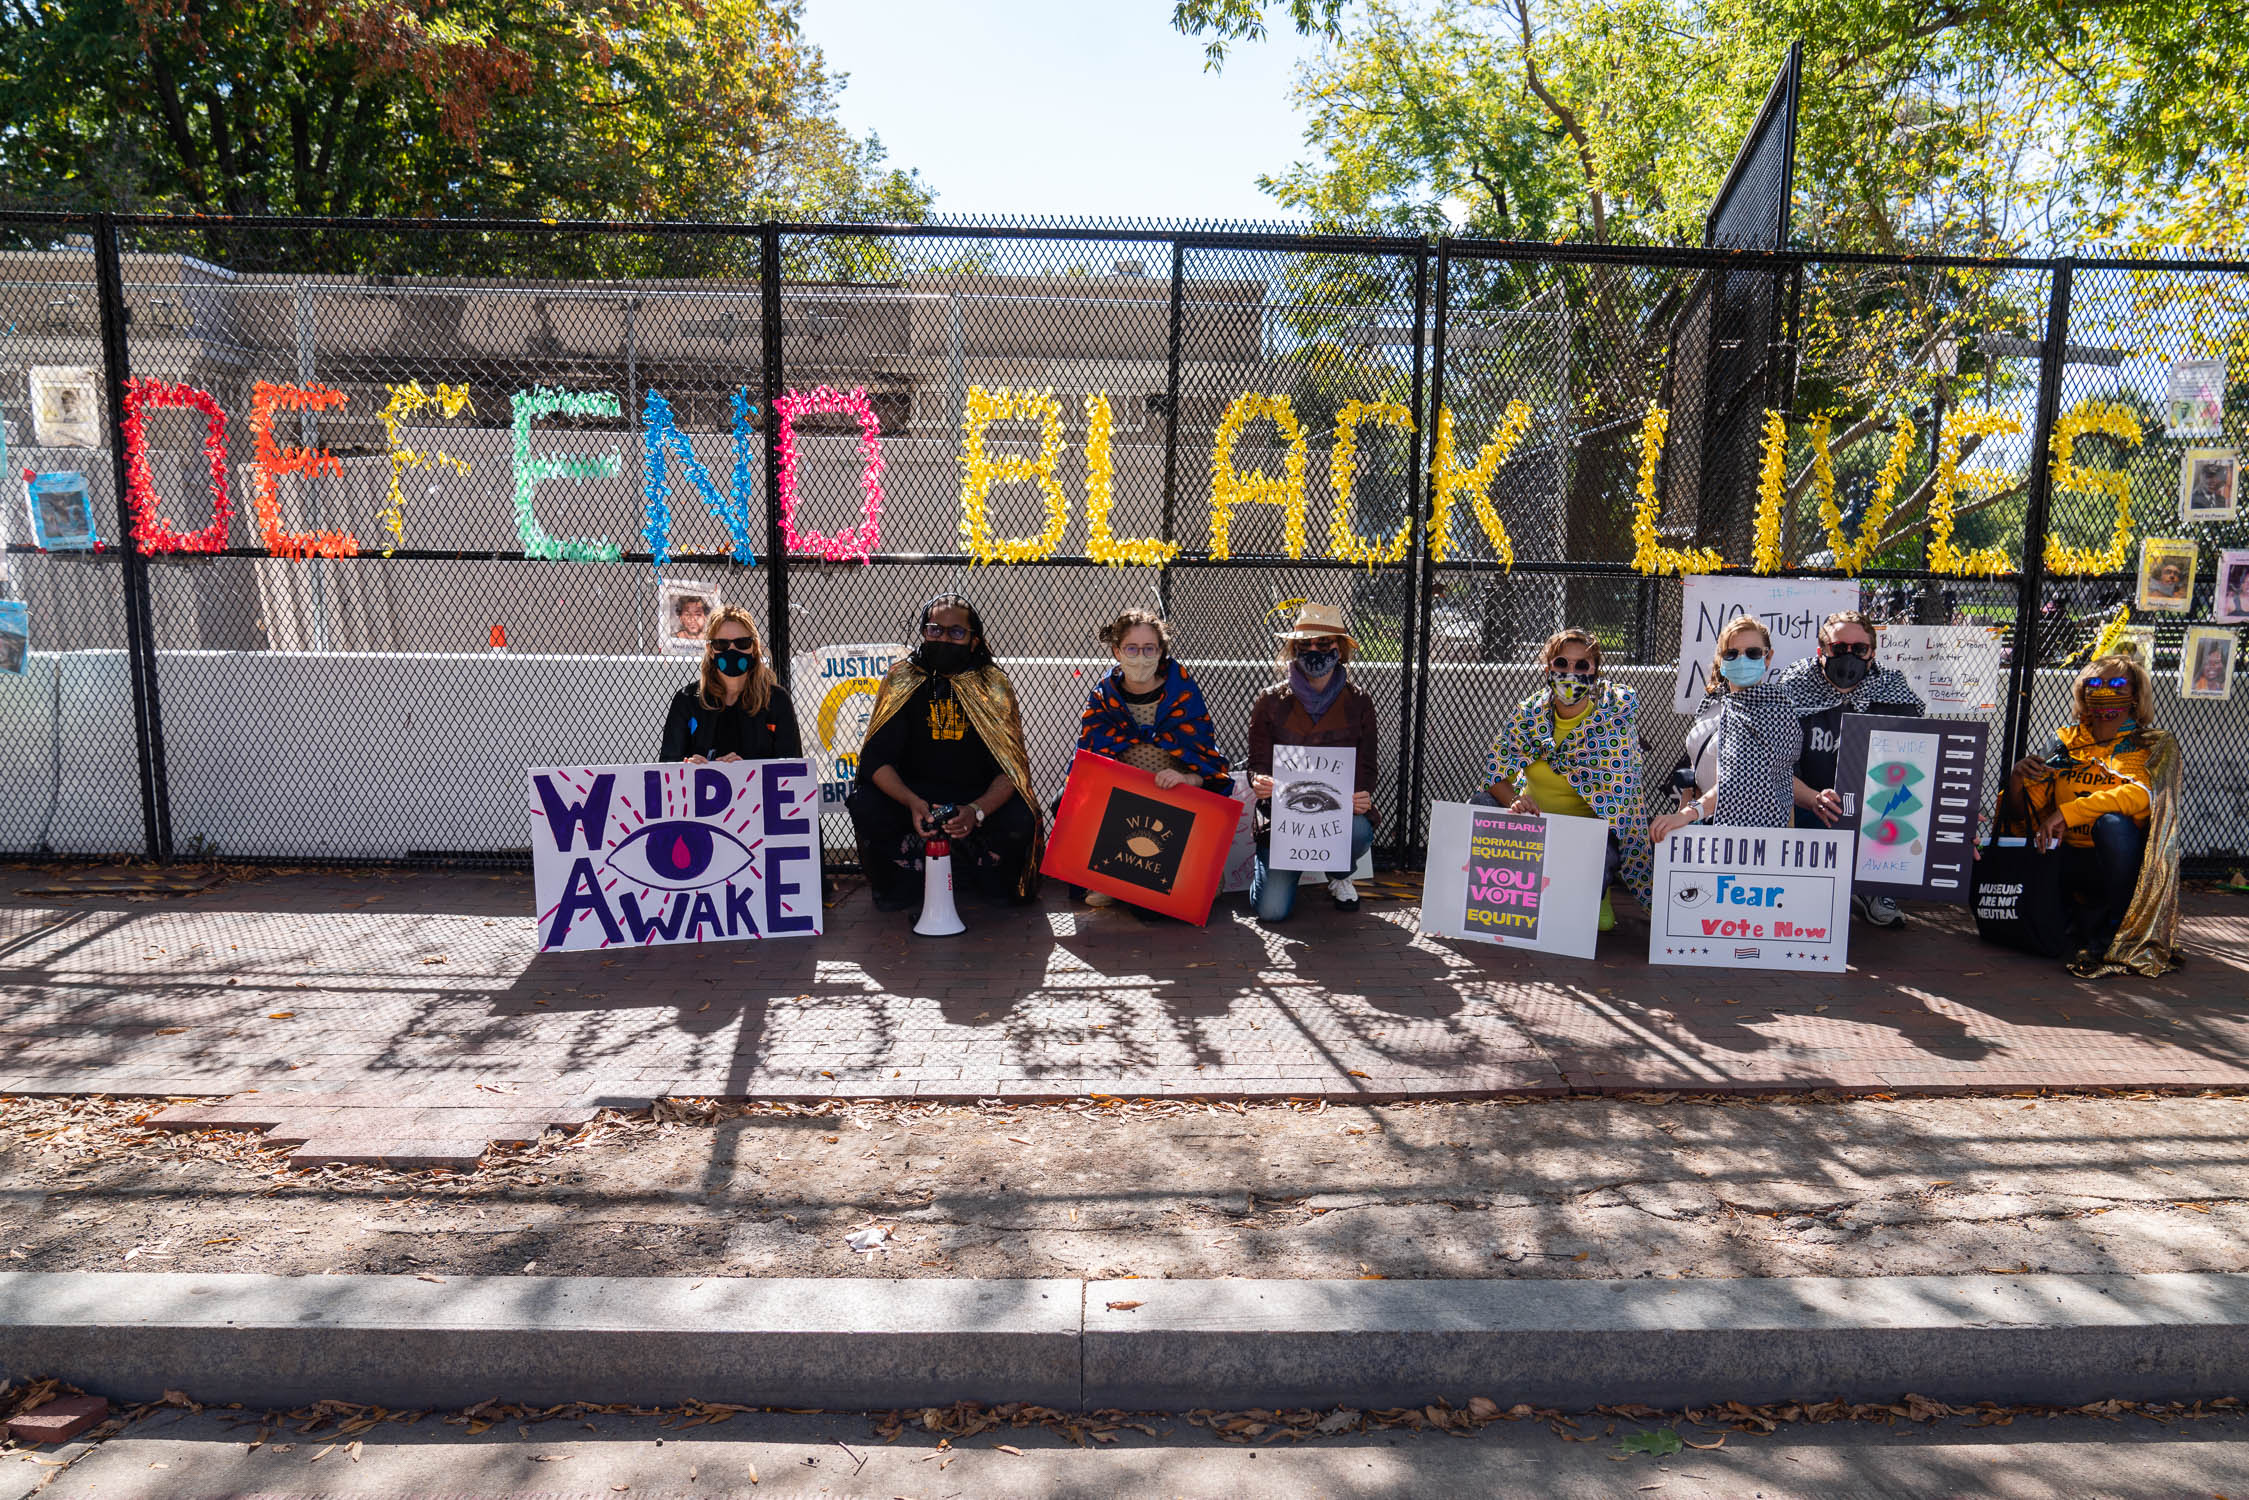 Photograph of people by a fence that says Defend Black Lives